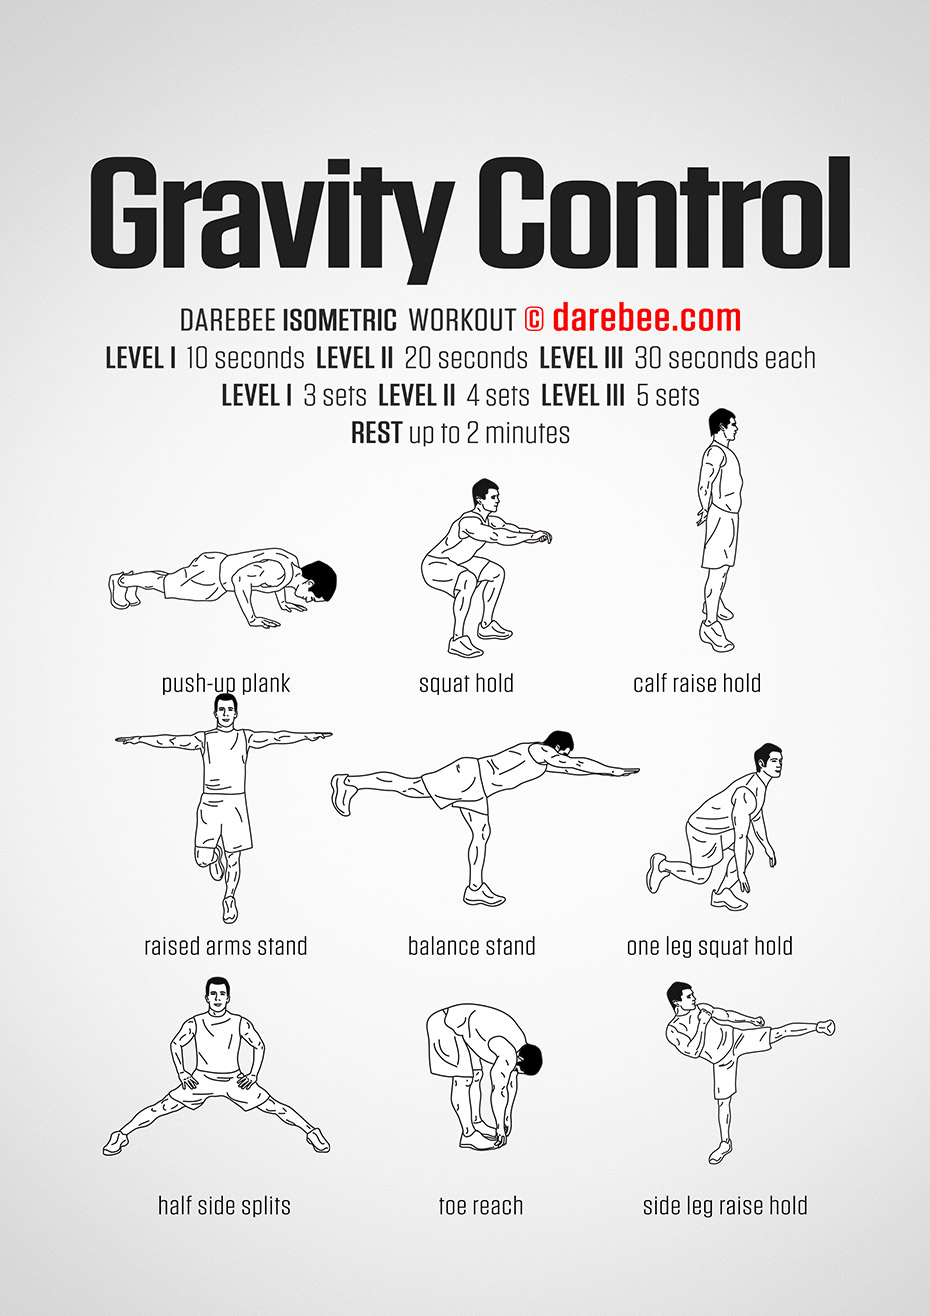 15 Minute Gravity workout routines for push your ABS